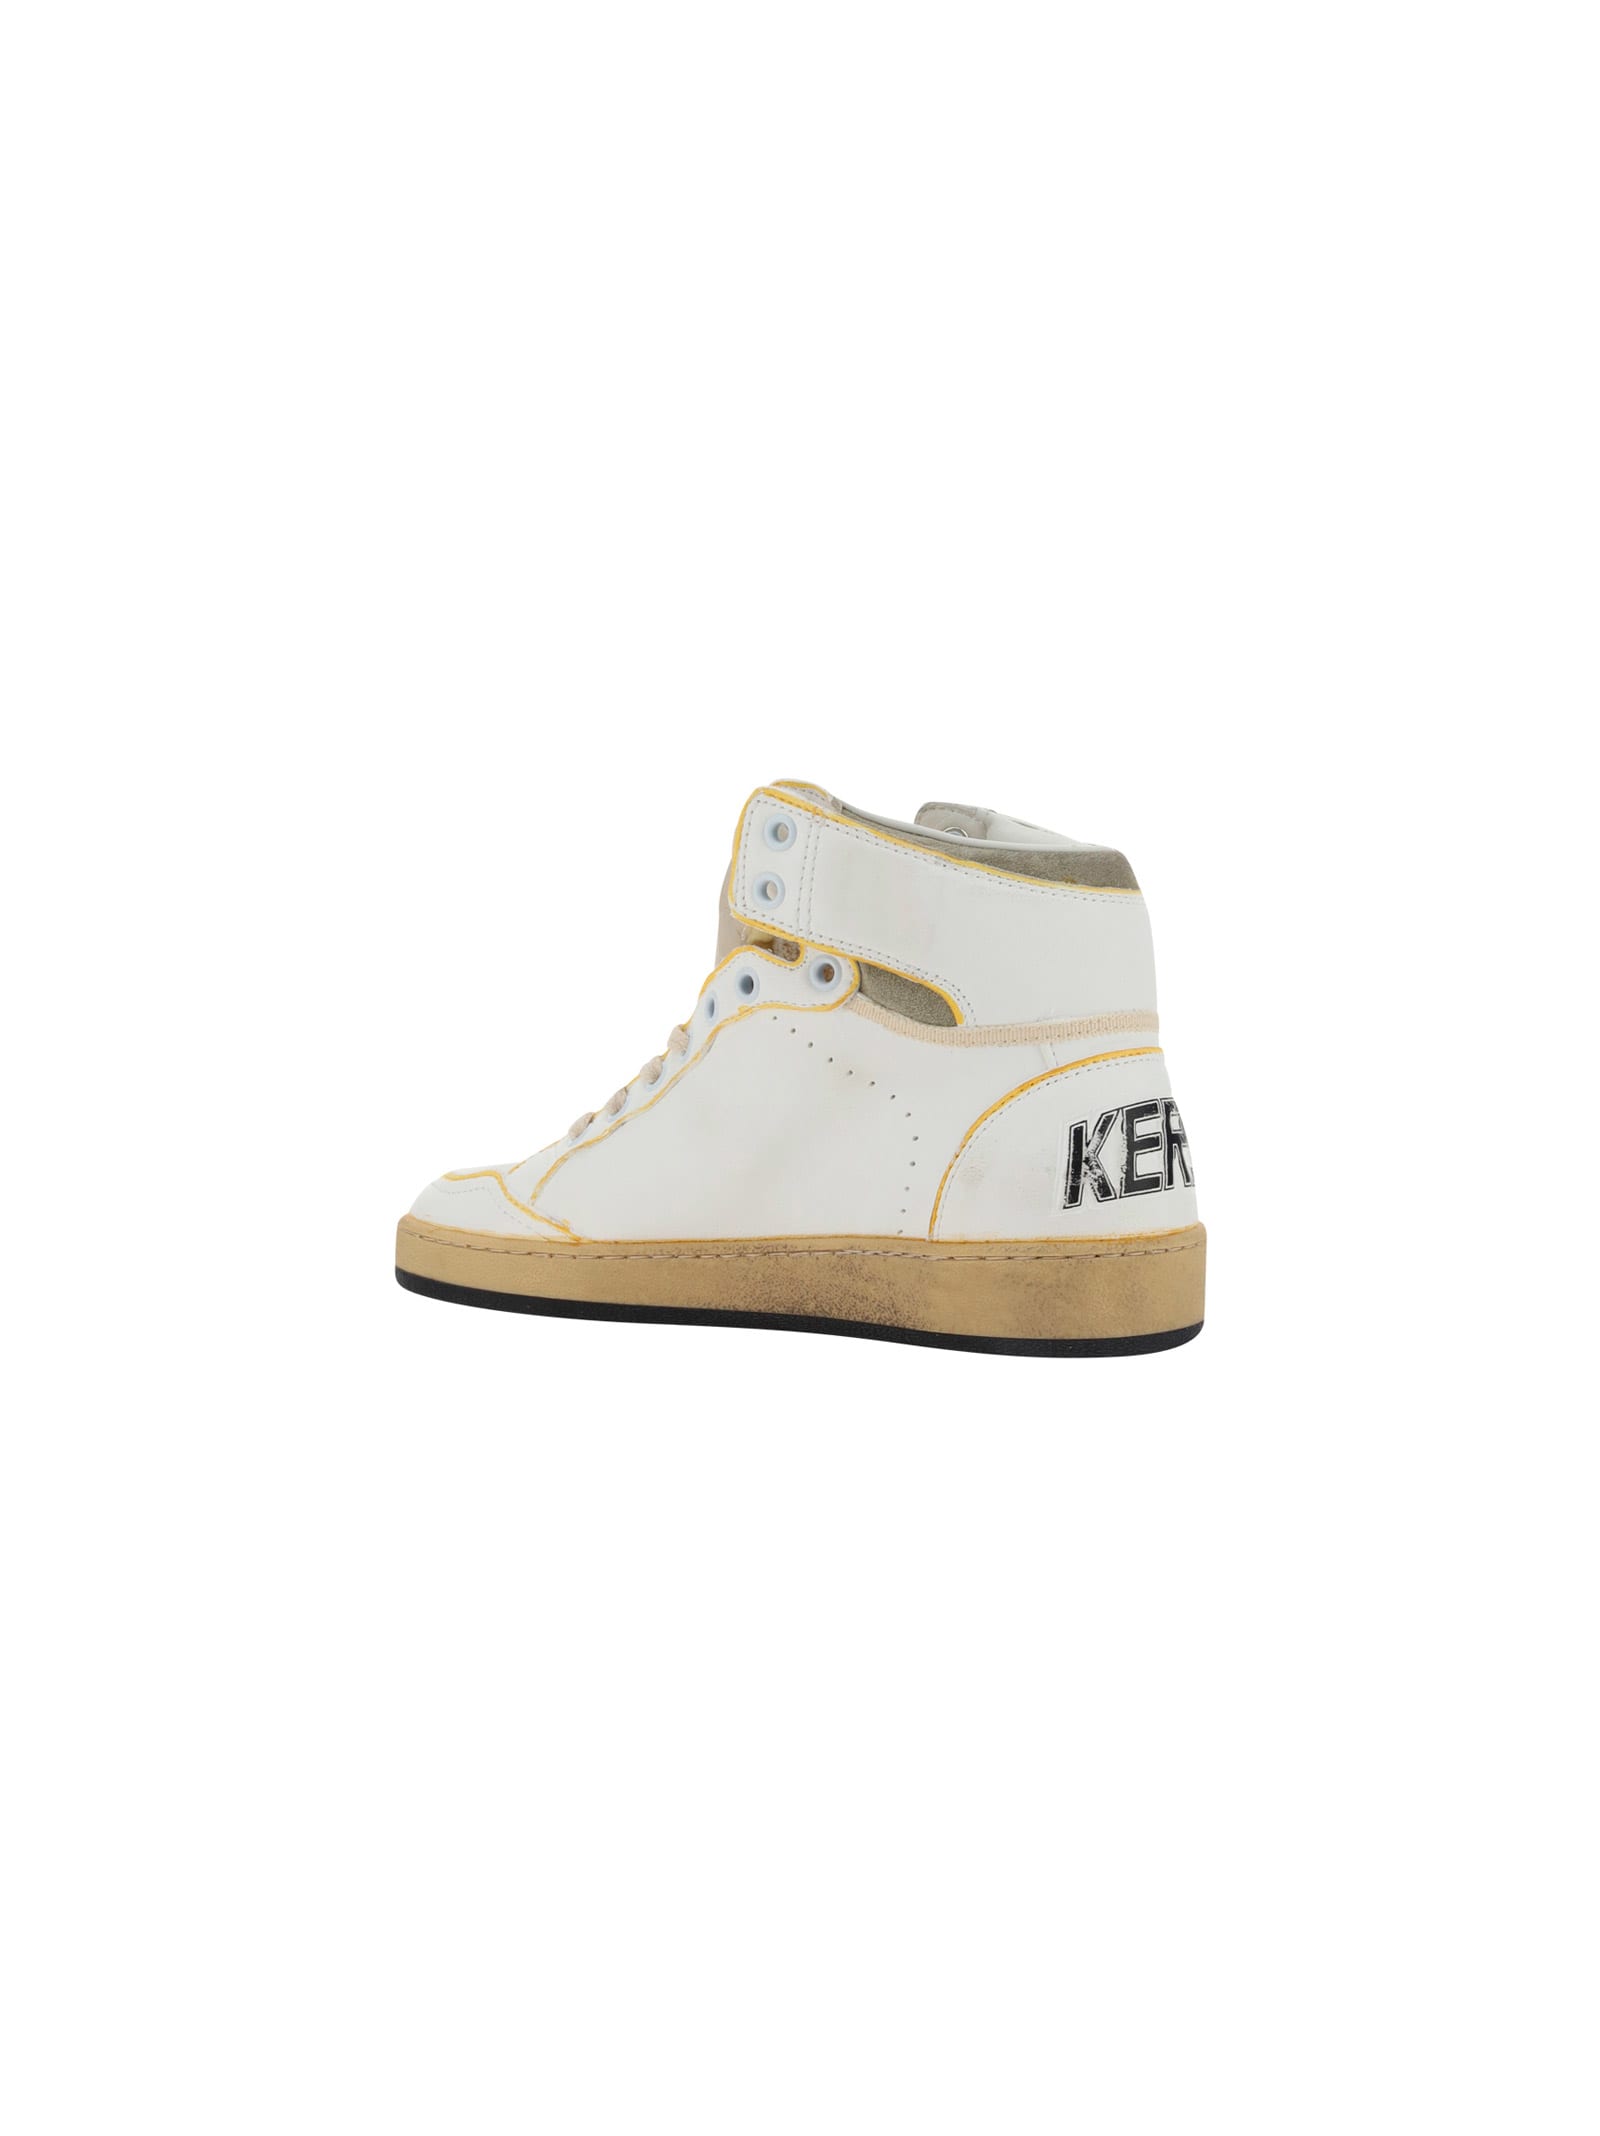 Shop Golden Goose Sky Star Sneakers In White/taupe